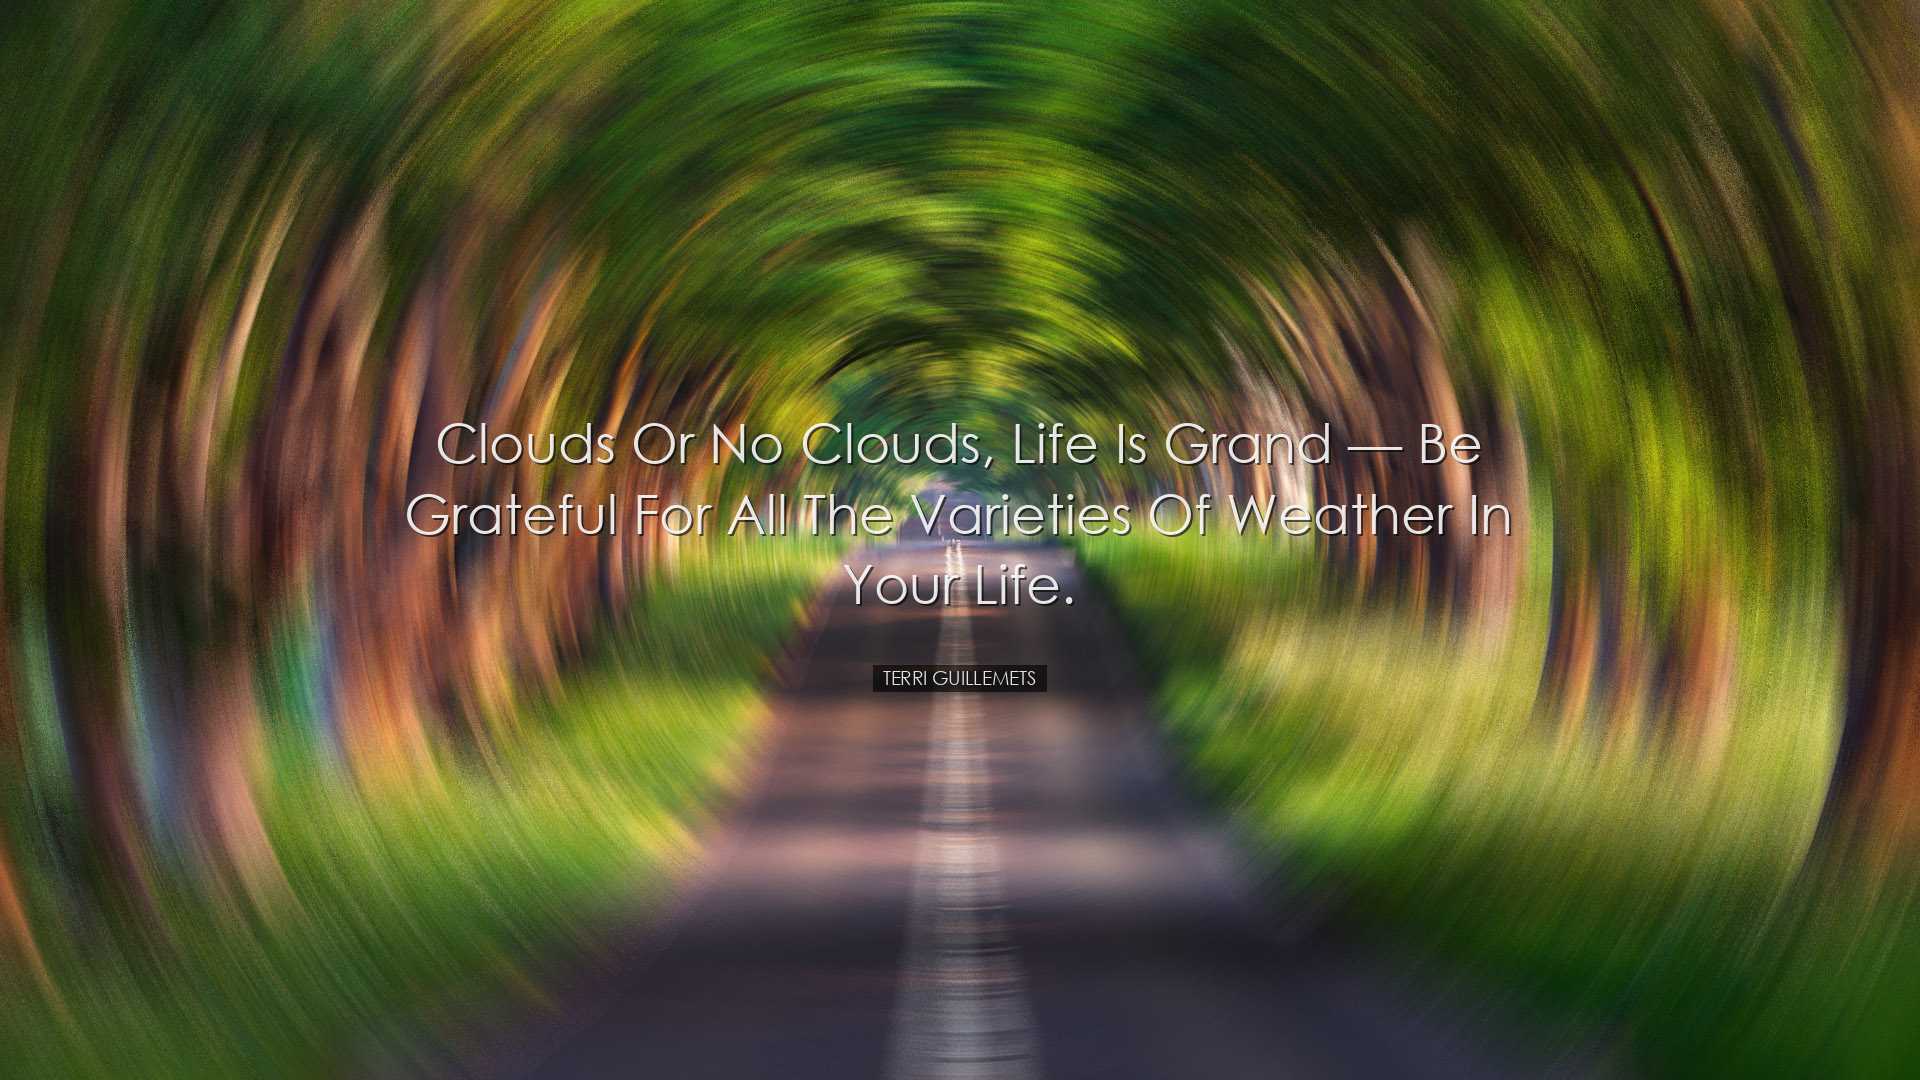 Clouds or no clouds, life is grand — be grateful for all the